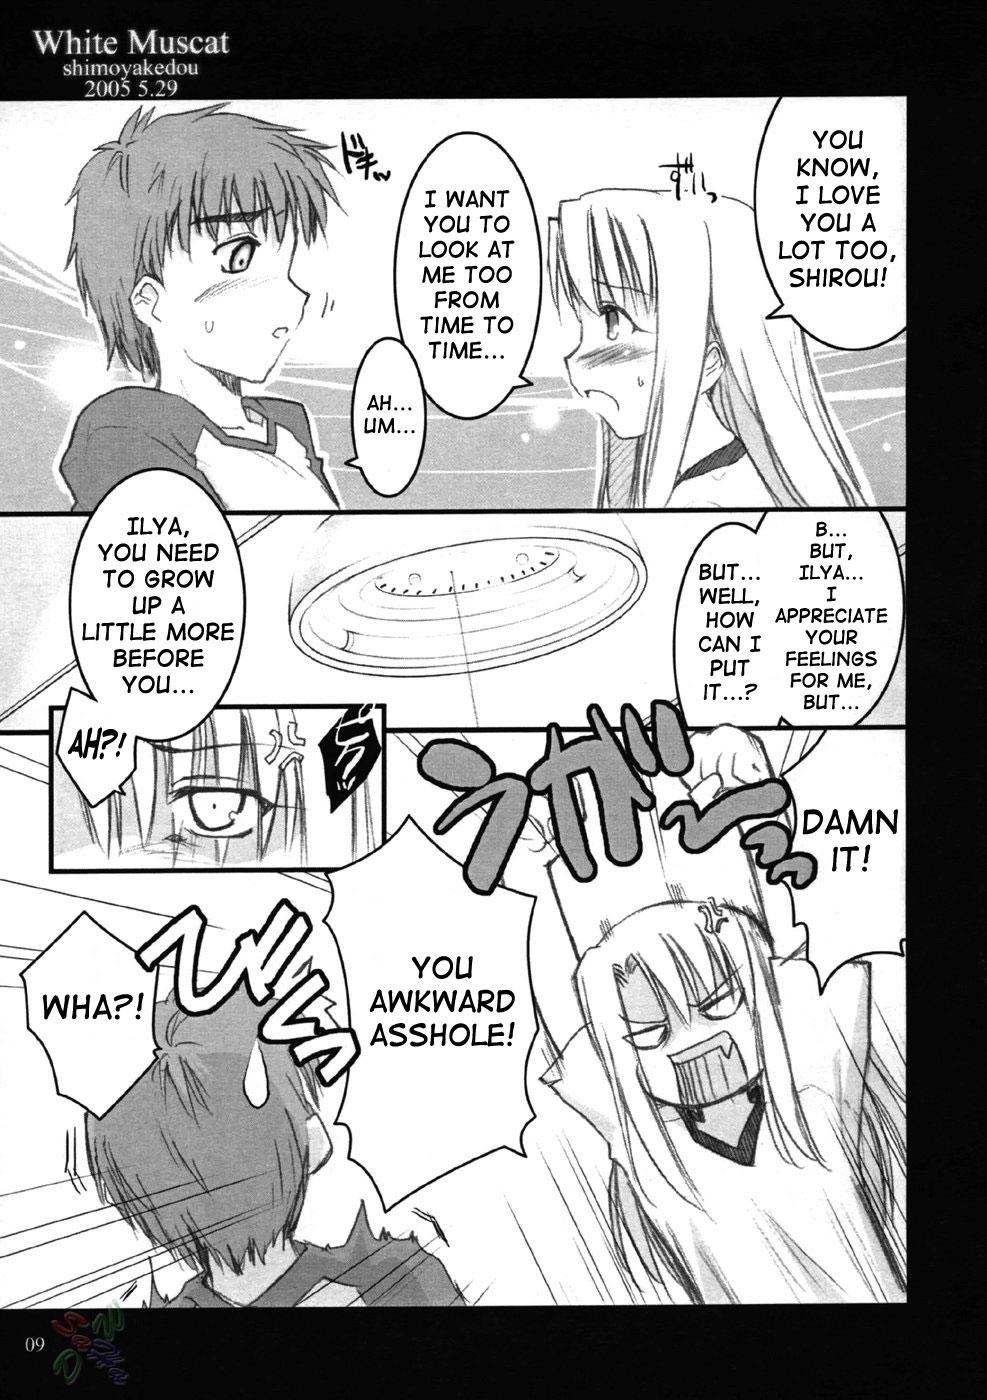 Lovers White Muscat - Fate stay night Guy - Page 8